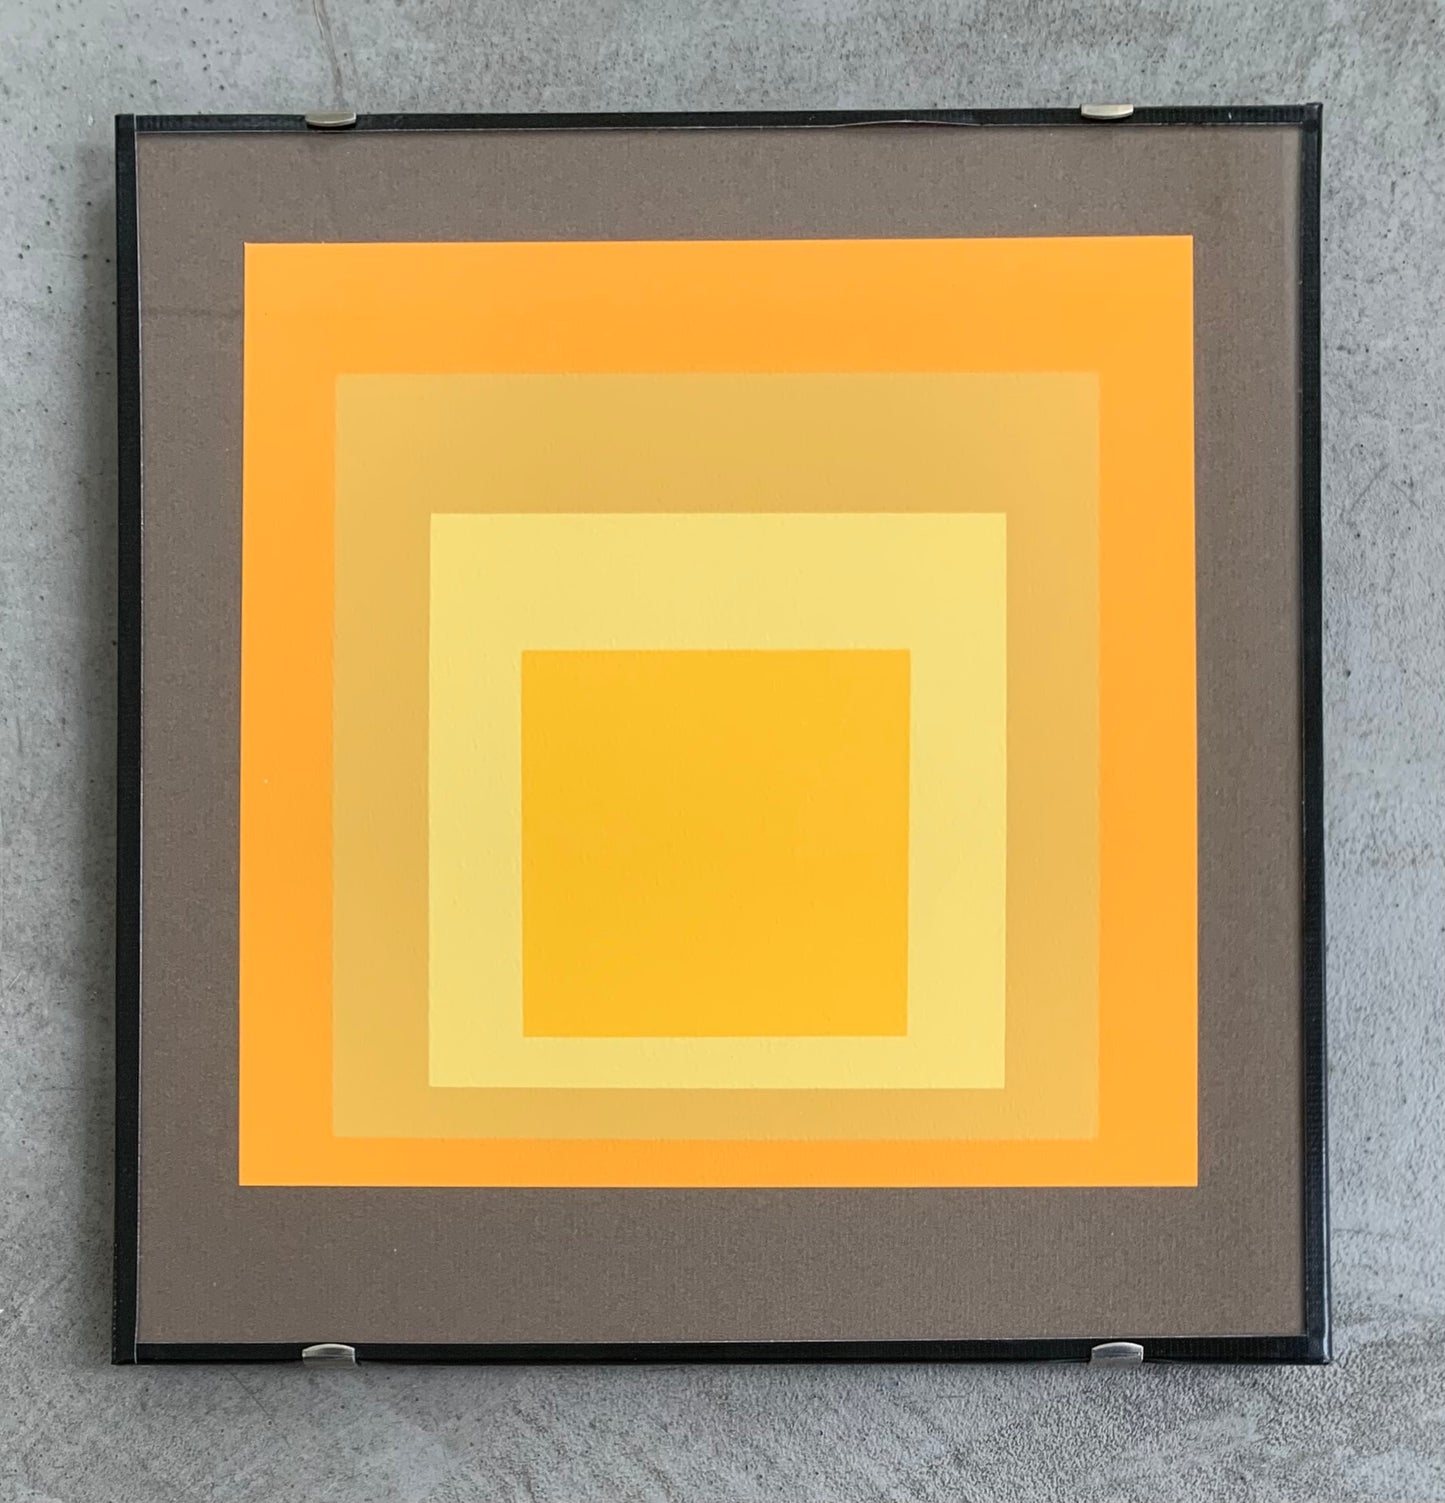 Josef Albers. "Homage to the Square", 1960's